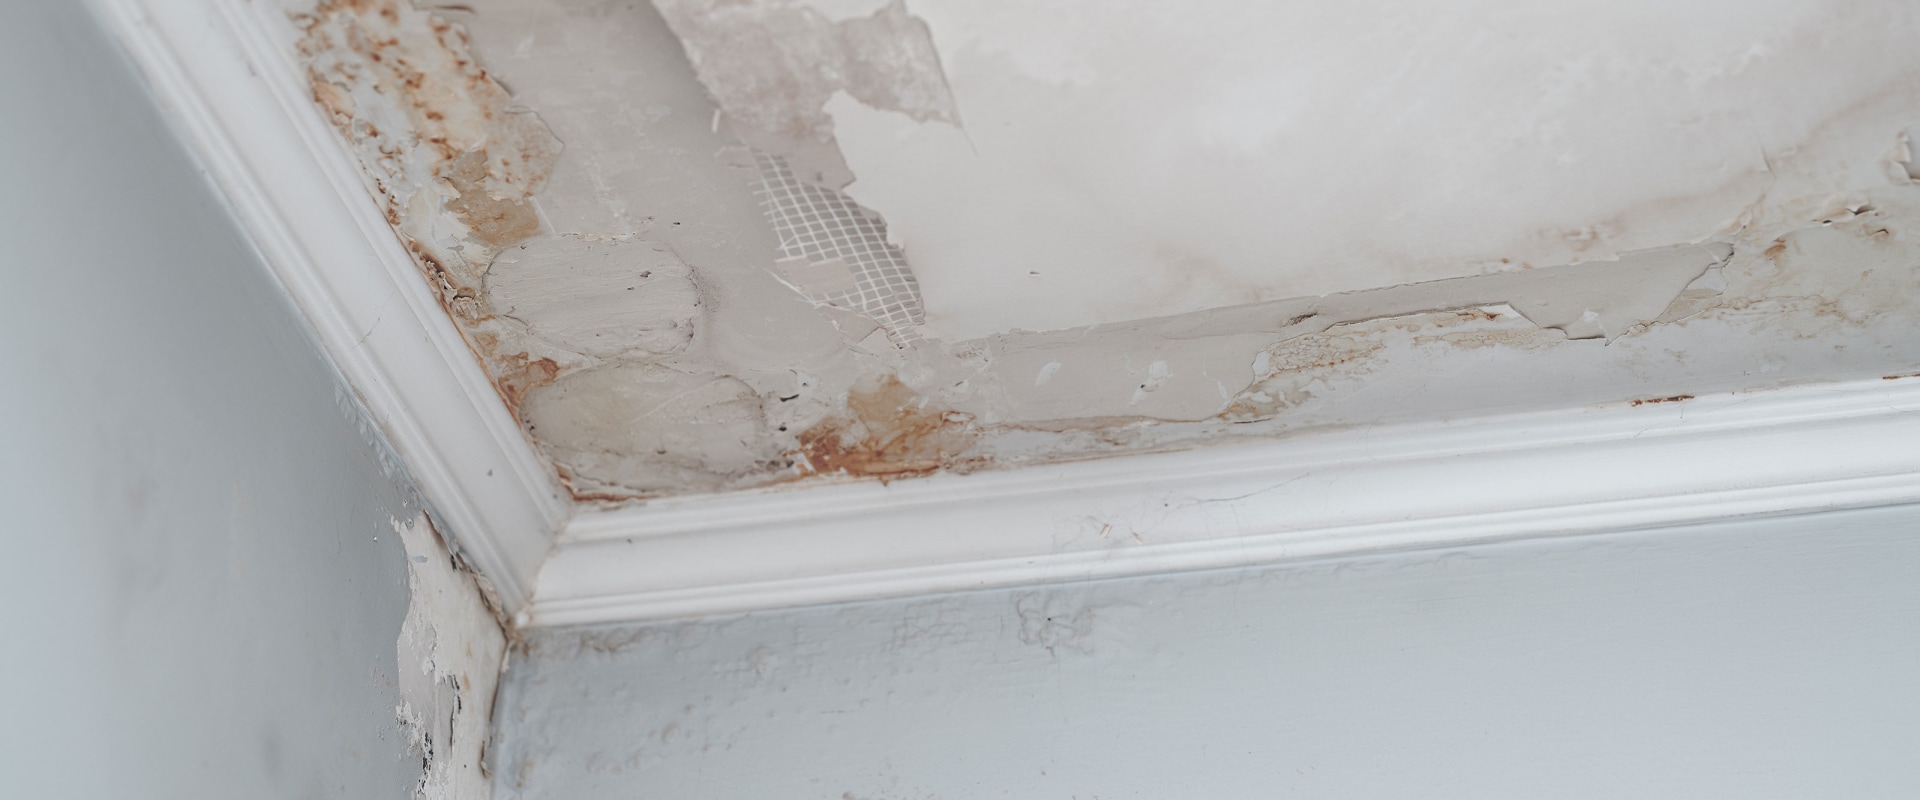 Can you fix water damage by yourself?